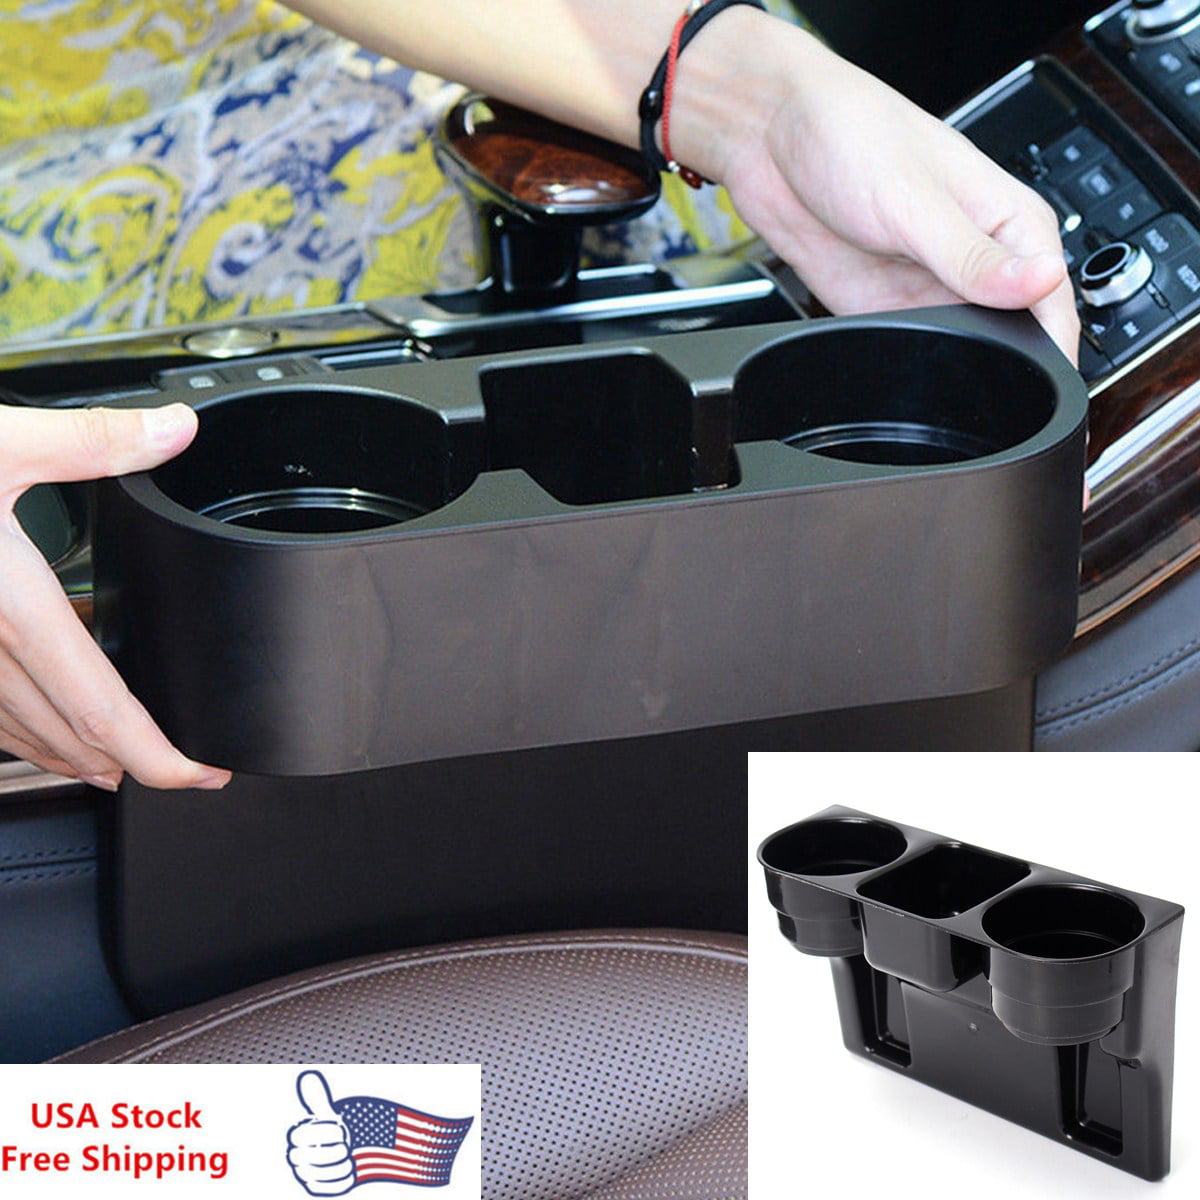 Universal Car Auto Truck Folding Water Drink Cup Bottle Holder Stand Mount